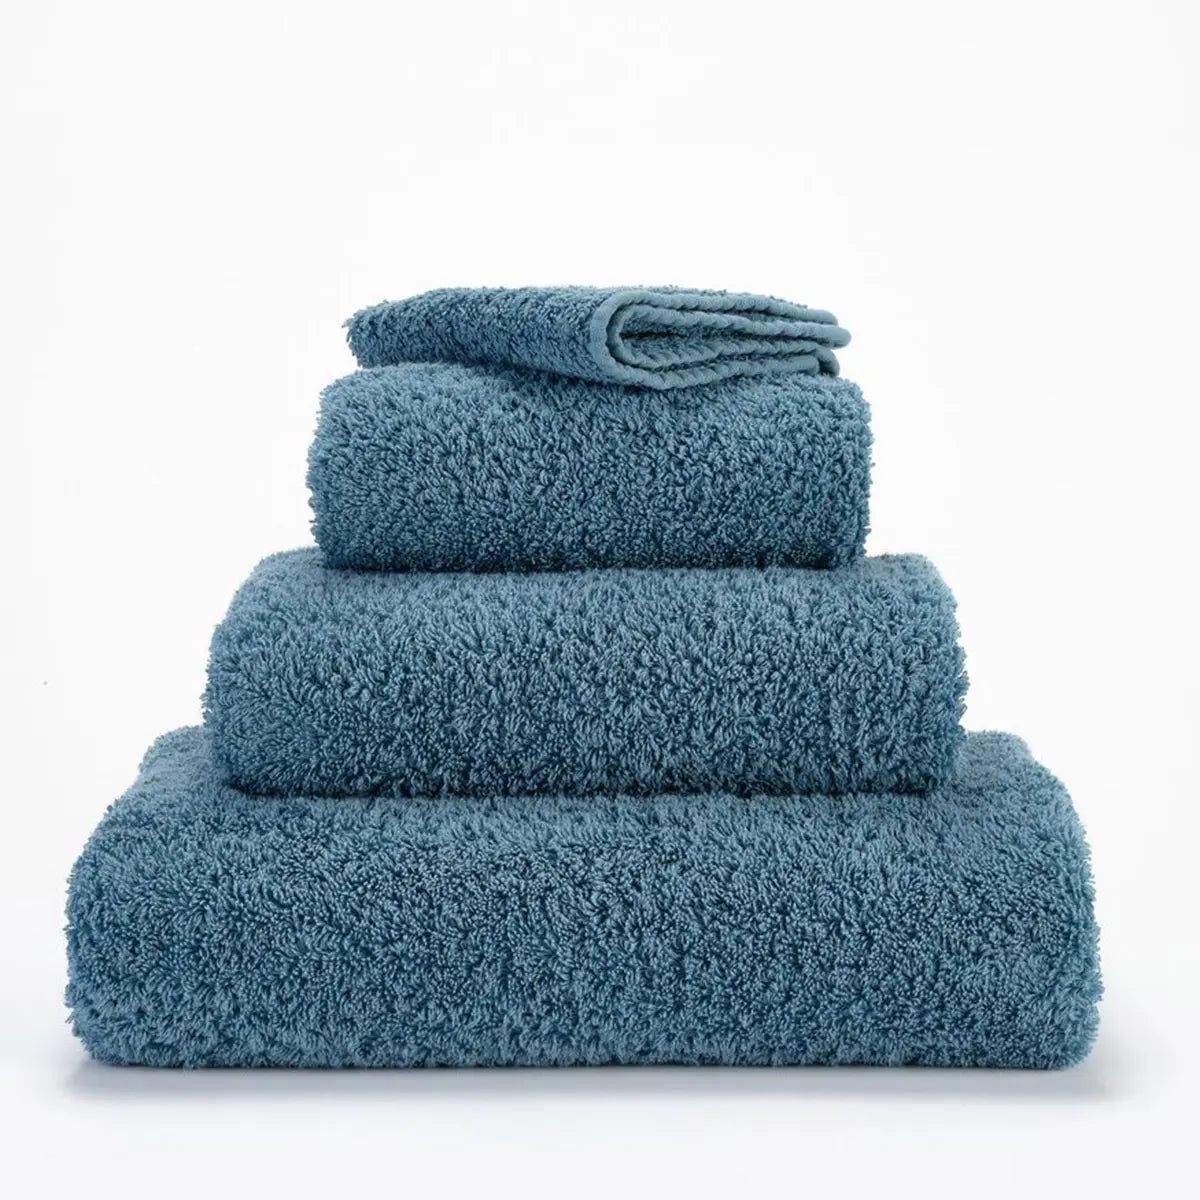 Abyss Super Pile Towels Blue Stone 